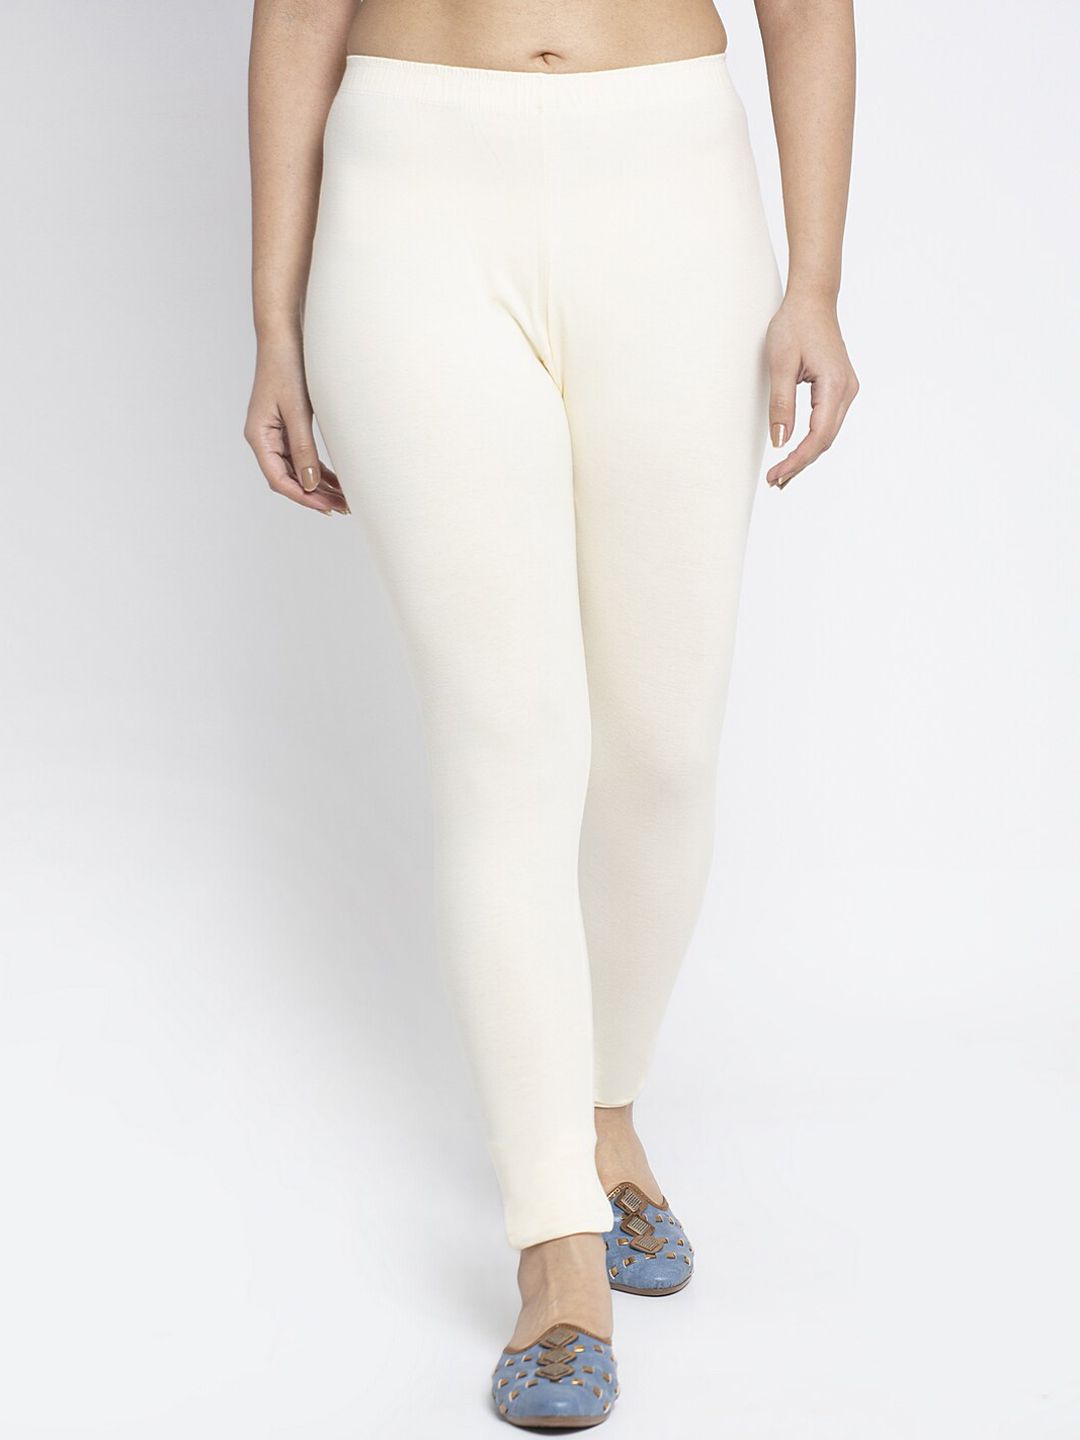 Jinfo Women off White Solid Cotton Lycra Legging Price in India